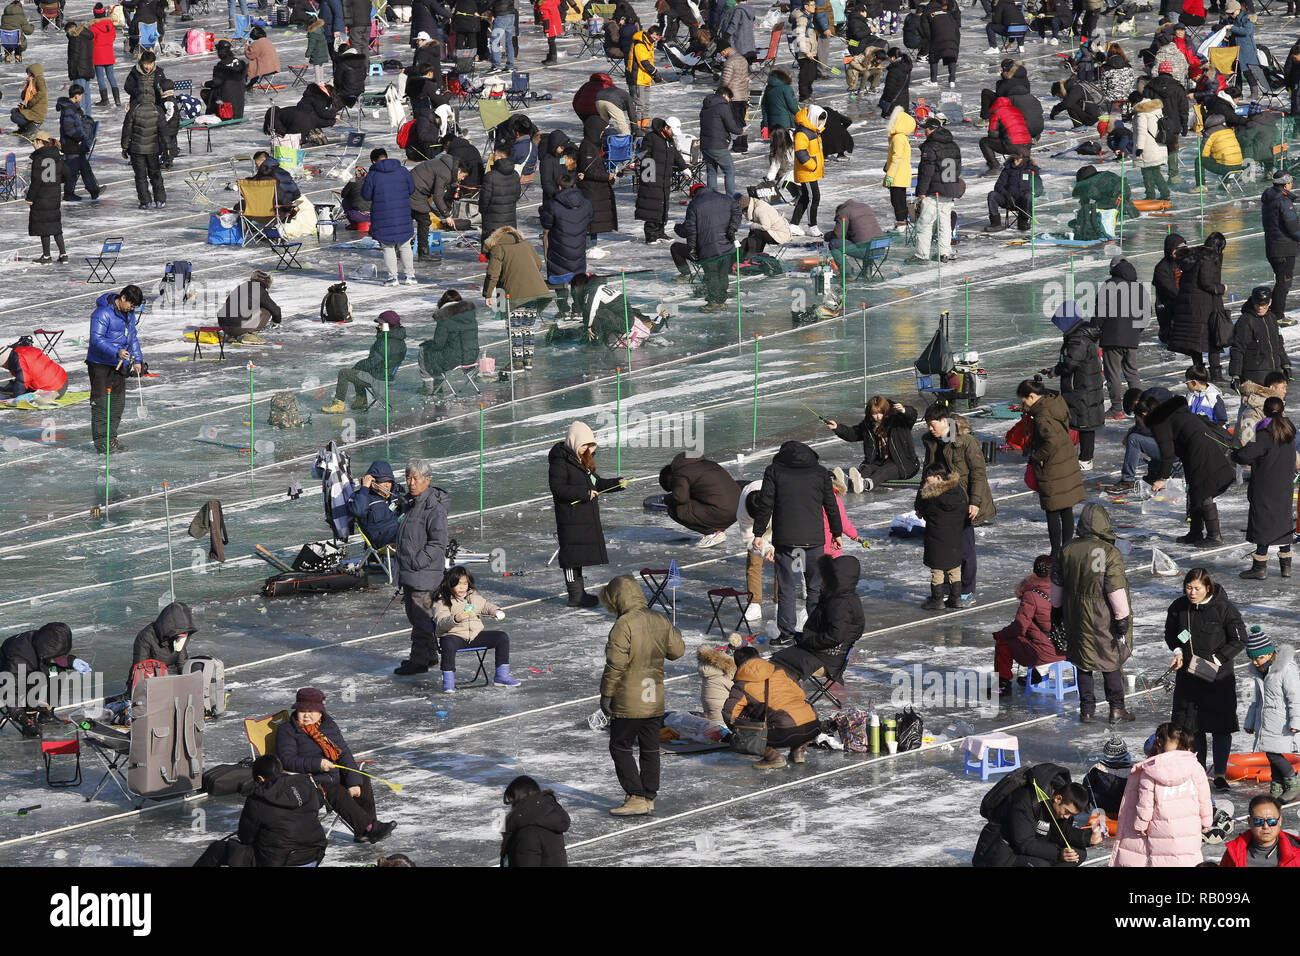 Hwacheon, South Korea. 5th Jan, 2019. January 5, 2019-Hwacheon, South Korea-Visitors cast lines through holes drilled in the surface of a frozen river during a trout catching contest in Hwacheon, South Korea. The contest is part of an annual ice festival which draws over one million visitors every year. Credit: Ryu Seung-Il/ZUMA Wire/Alamy Live News Stock Photo